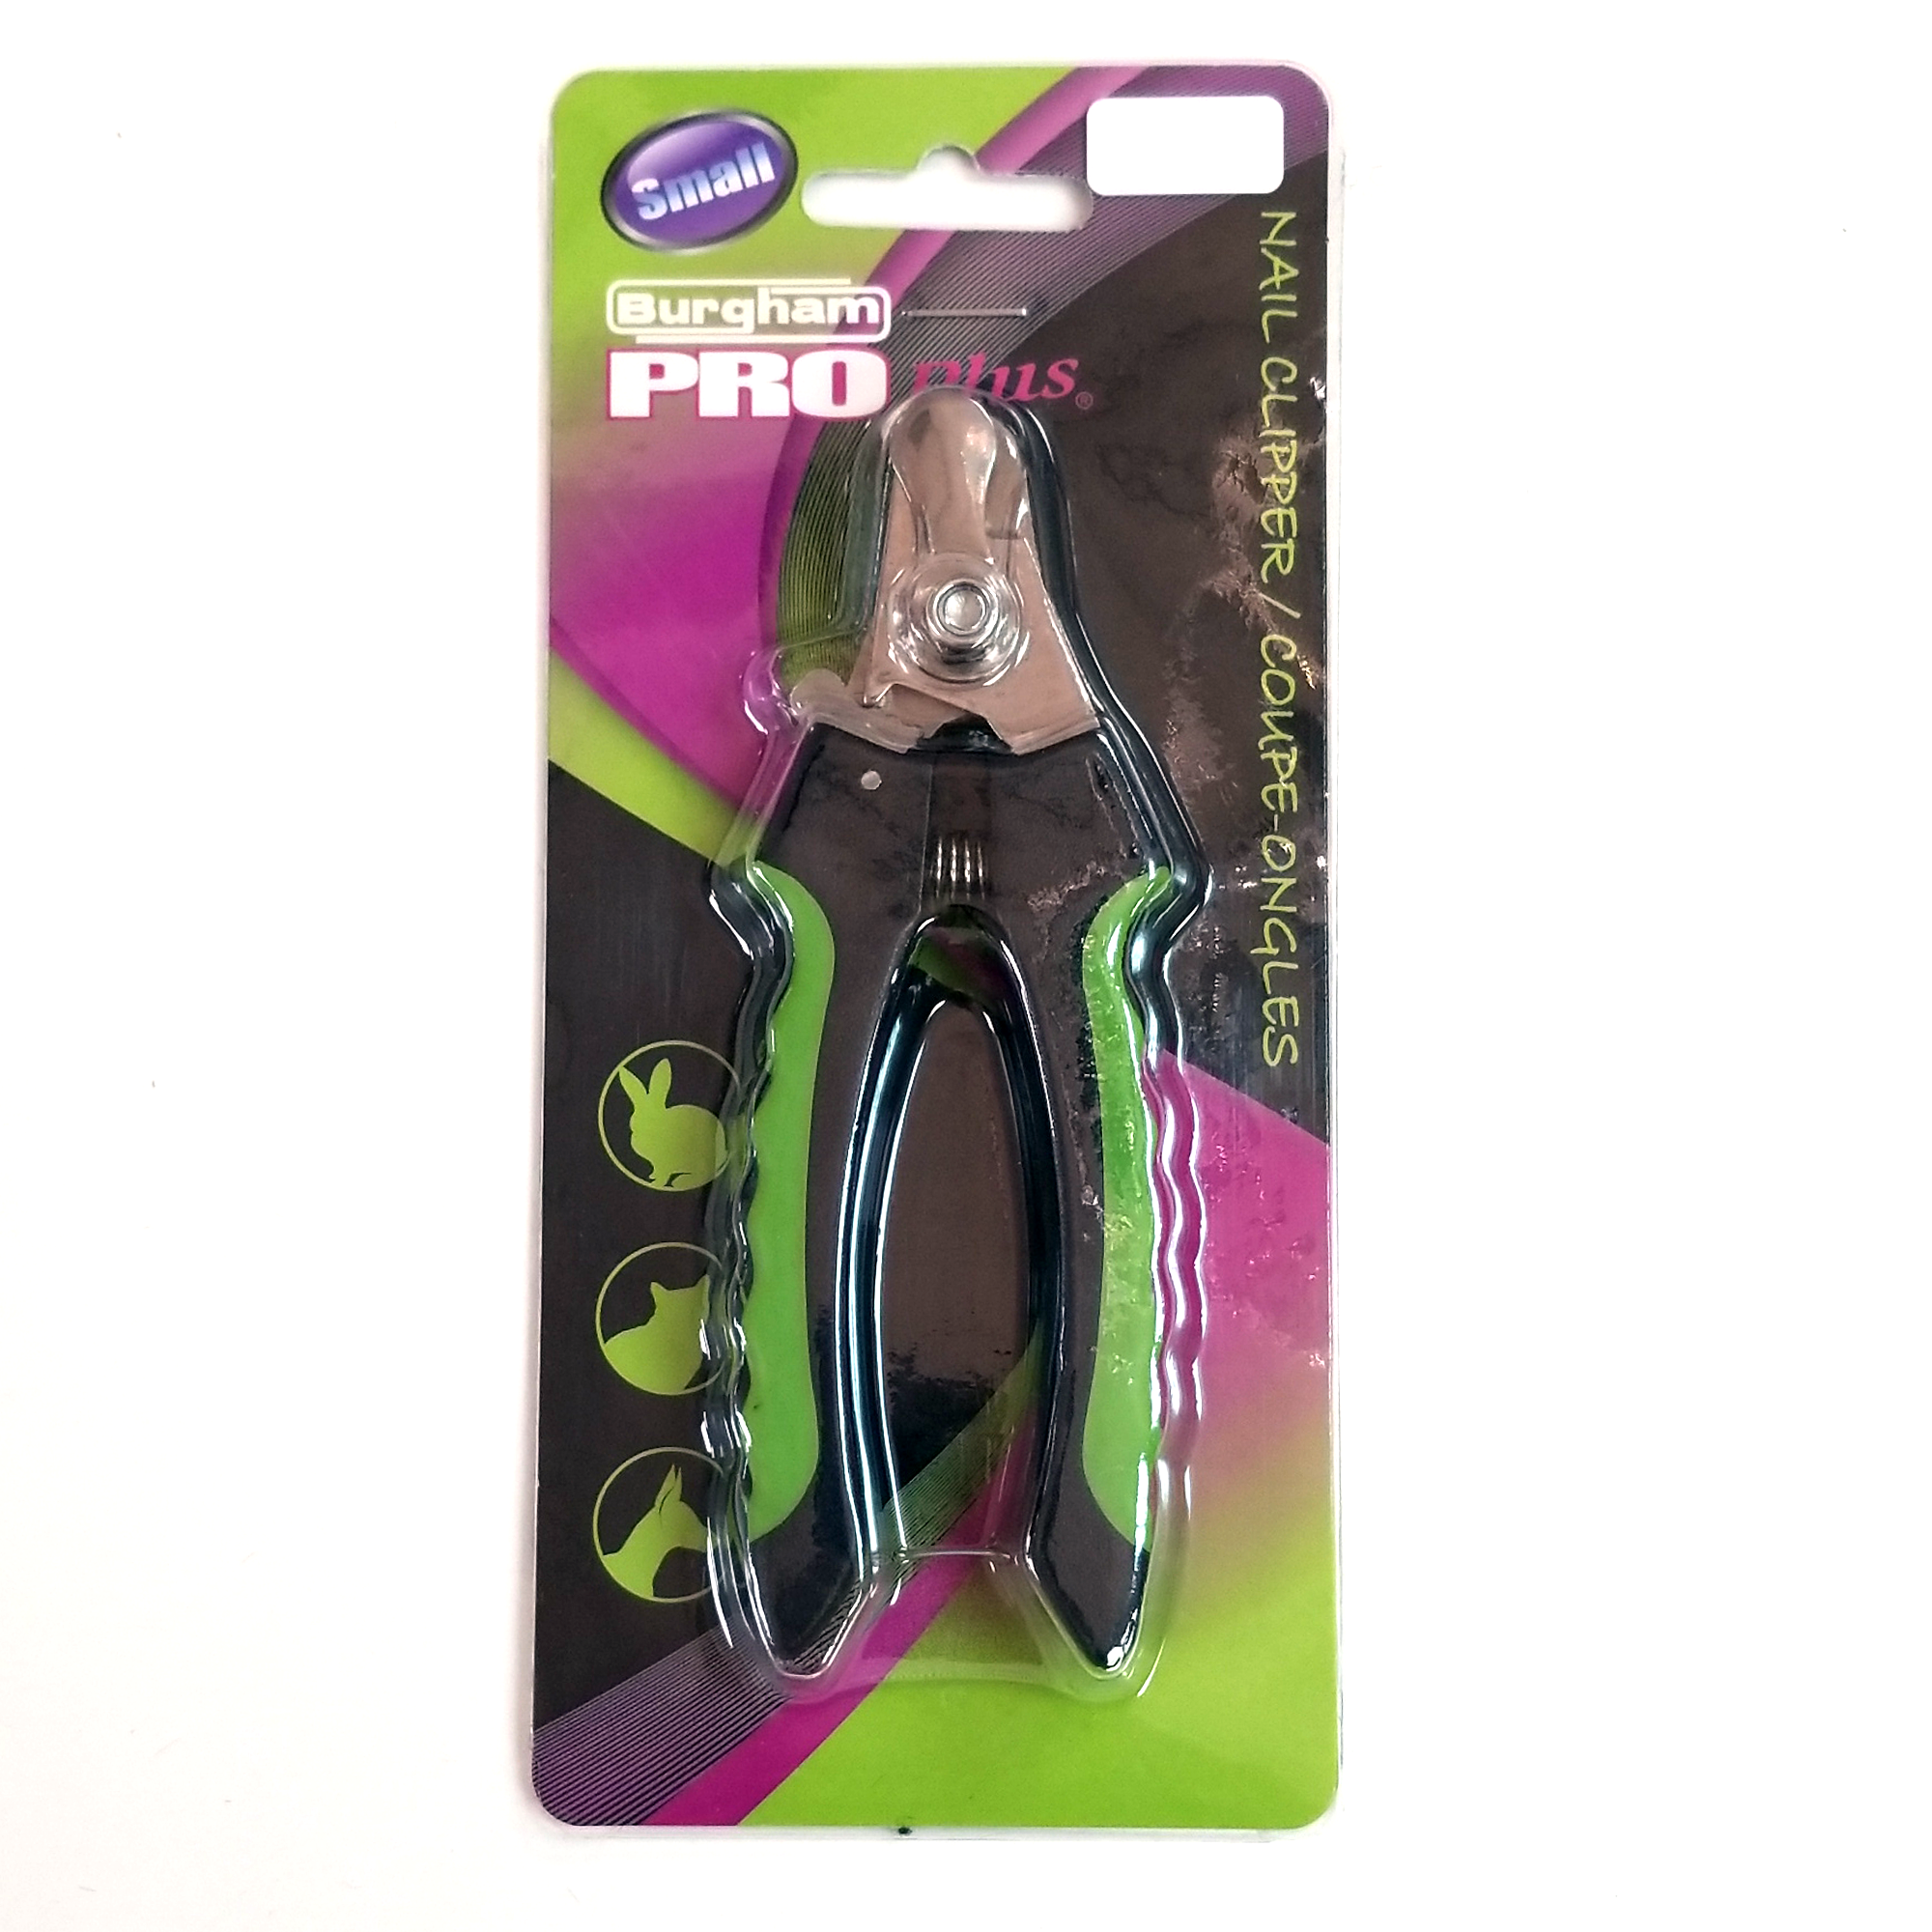 Burgham Pro Plus Nail Clippers, Small